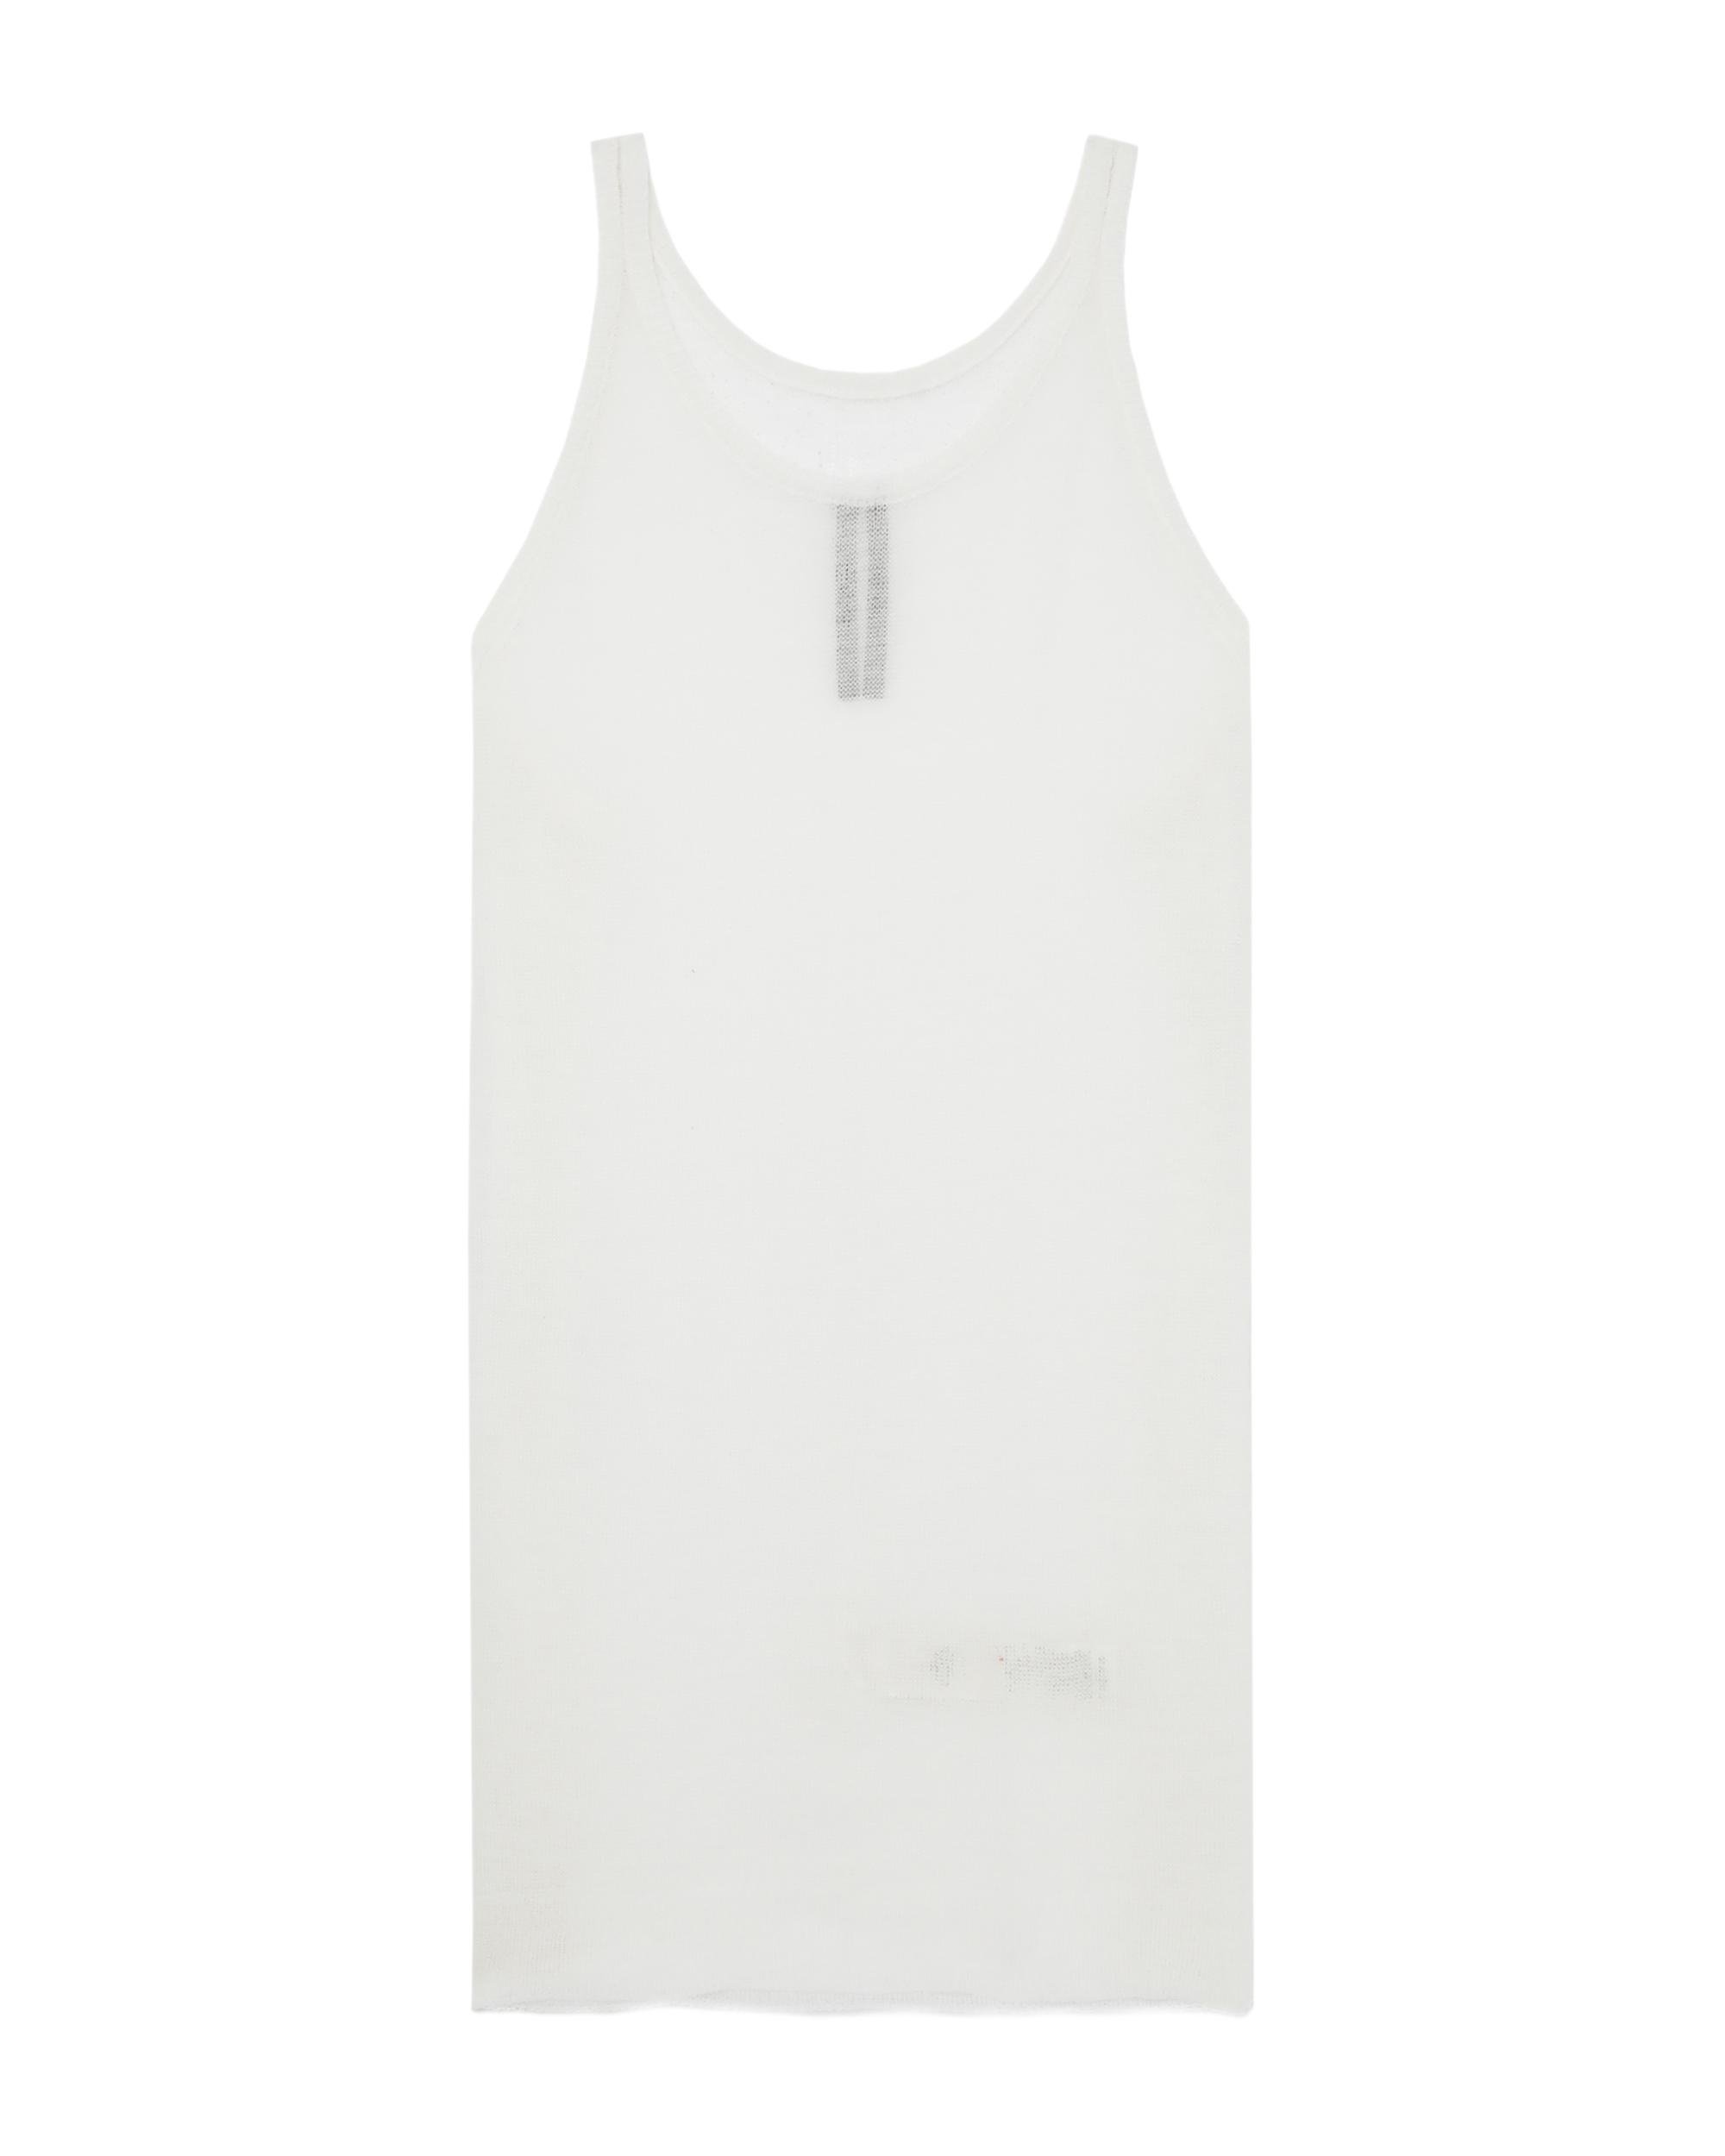 Knit tank top by RICK OWENS